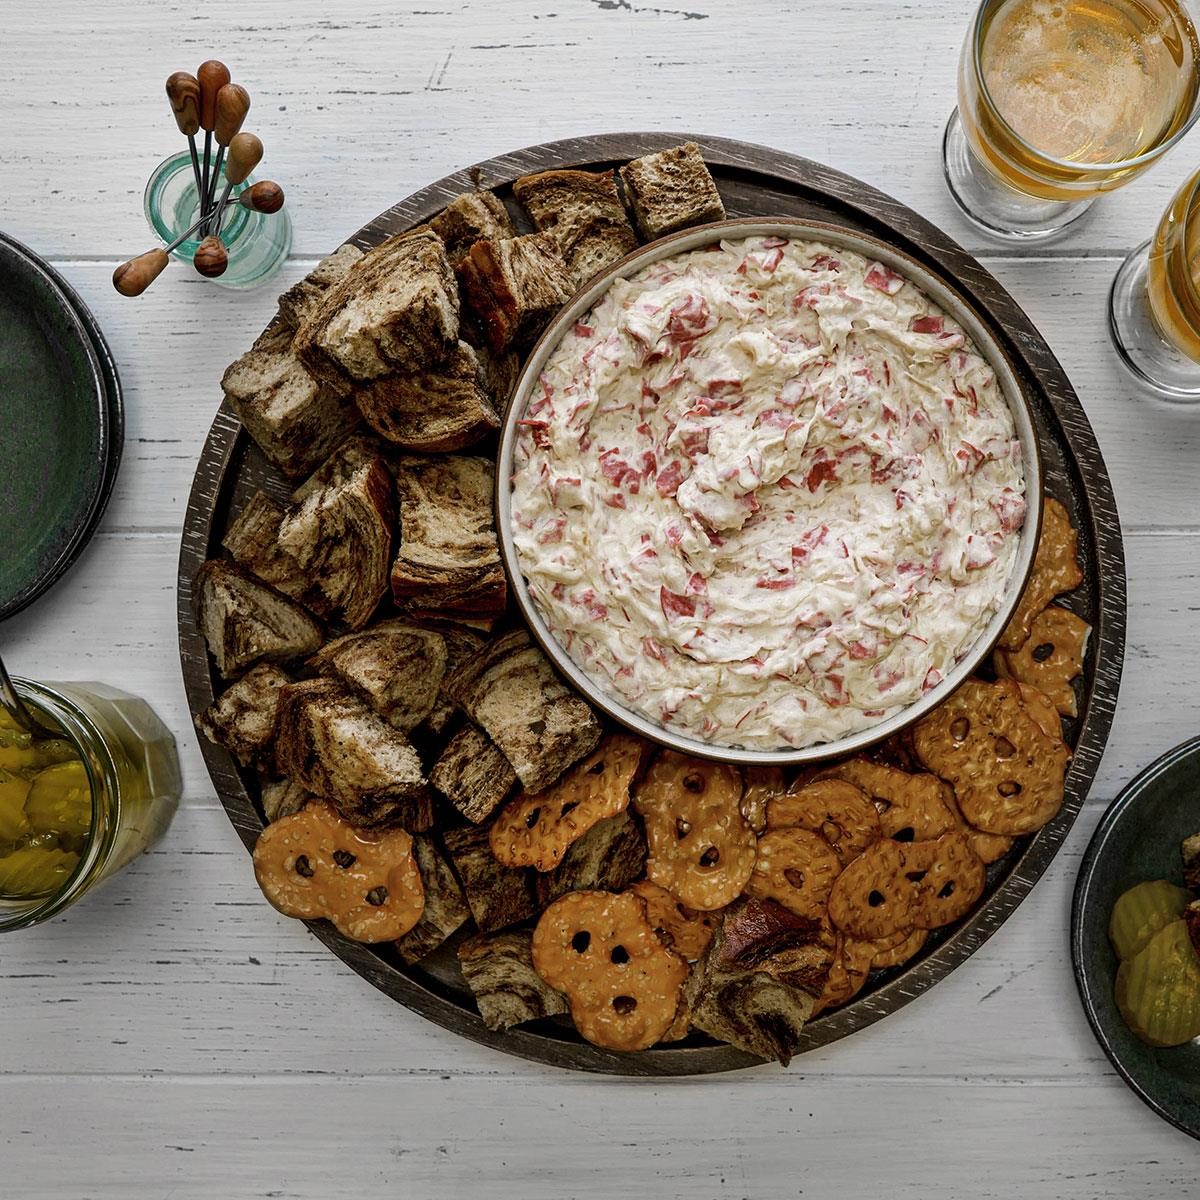 <p>This slow-cooked spread tastes just like the popular Reuben sandwich. Even when I double the recipe, I end up with an empty dish. —Mary Jane Kimmes, Hastings, Minnesota</p> <div class="listicle-page__buttons"> <div class="listicle-page__cta-button"><a href='https://www.tasteofhome.com/recipes/paddy-s-reuben-dip/'>Go to Recipe</a></div> </div>